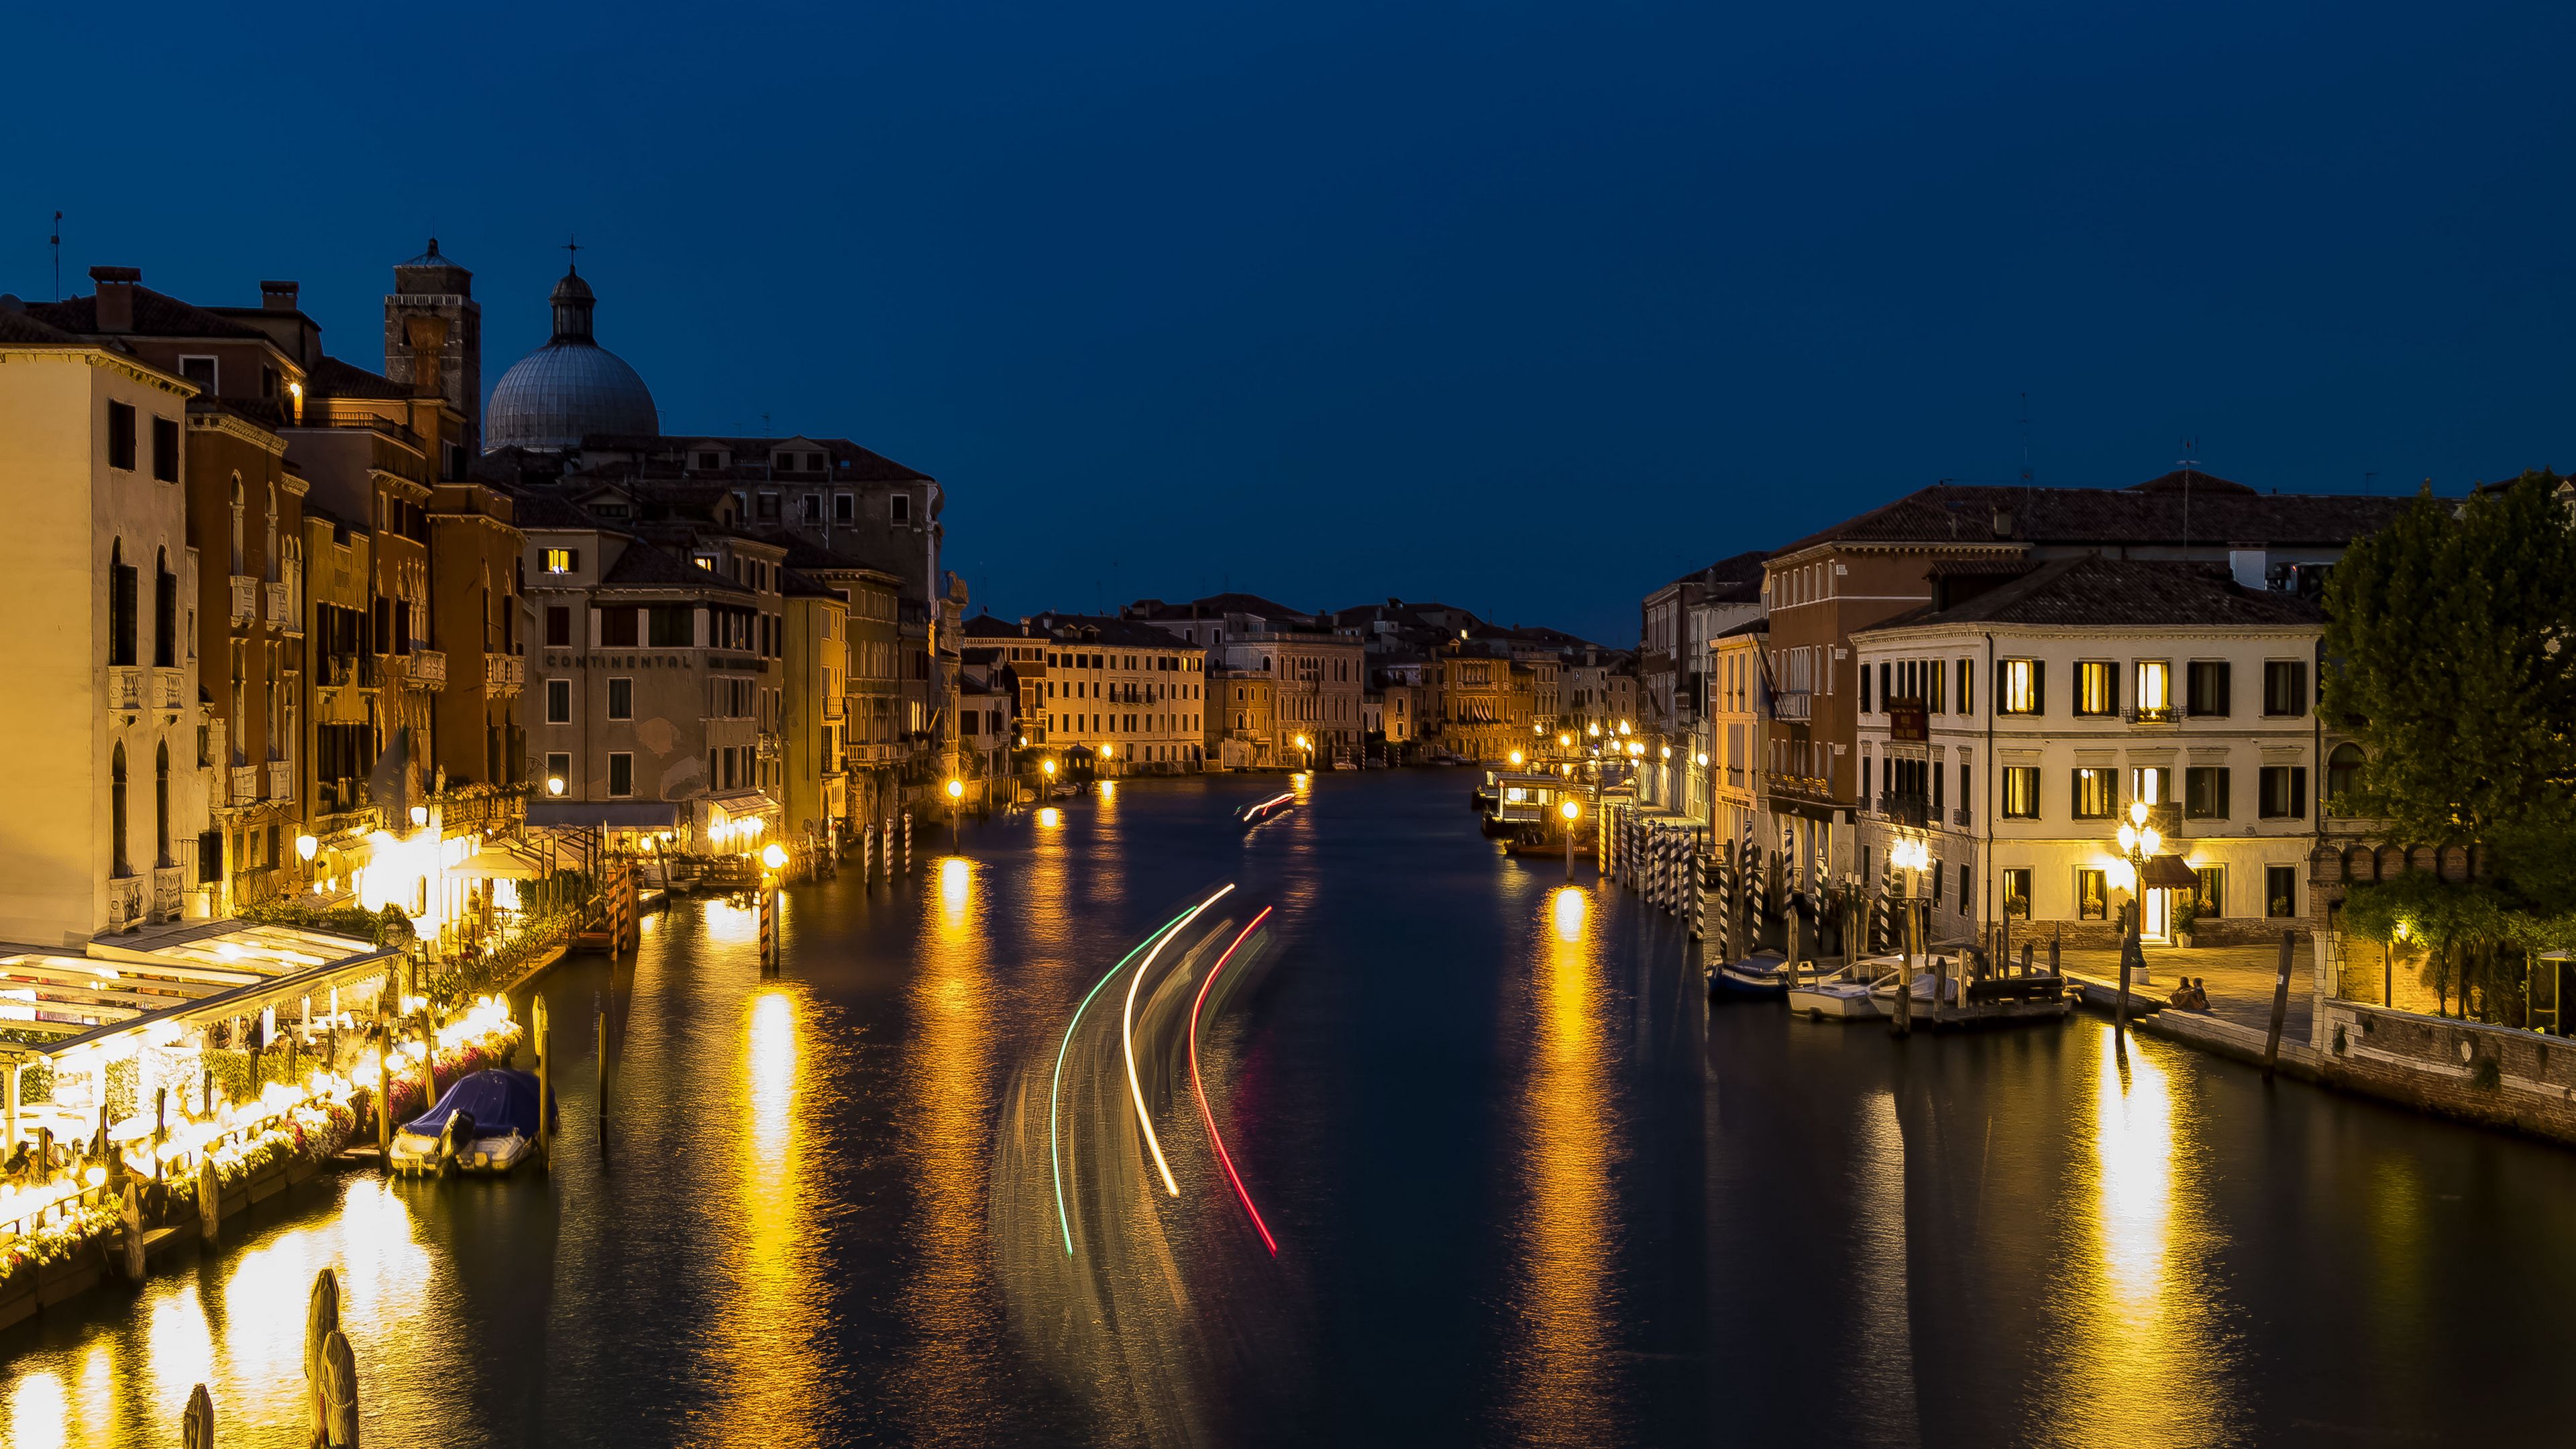 Download wallpaper 3840x2160 grand canal, venice, italy, canal ...